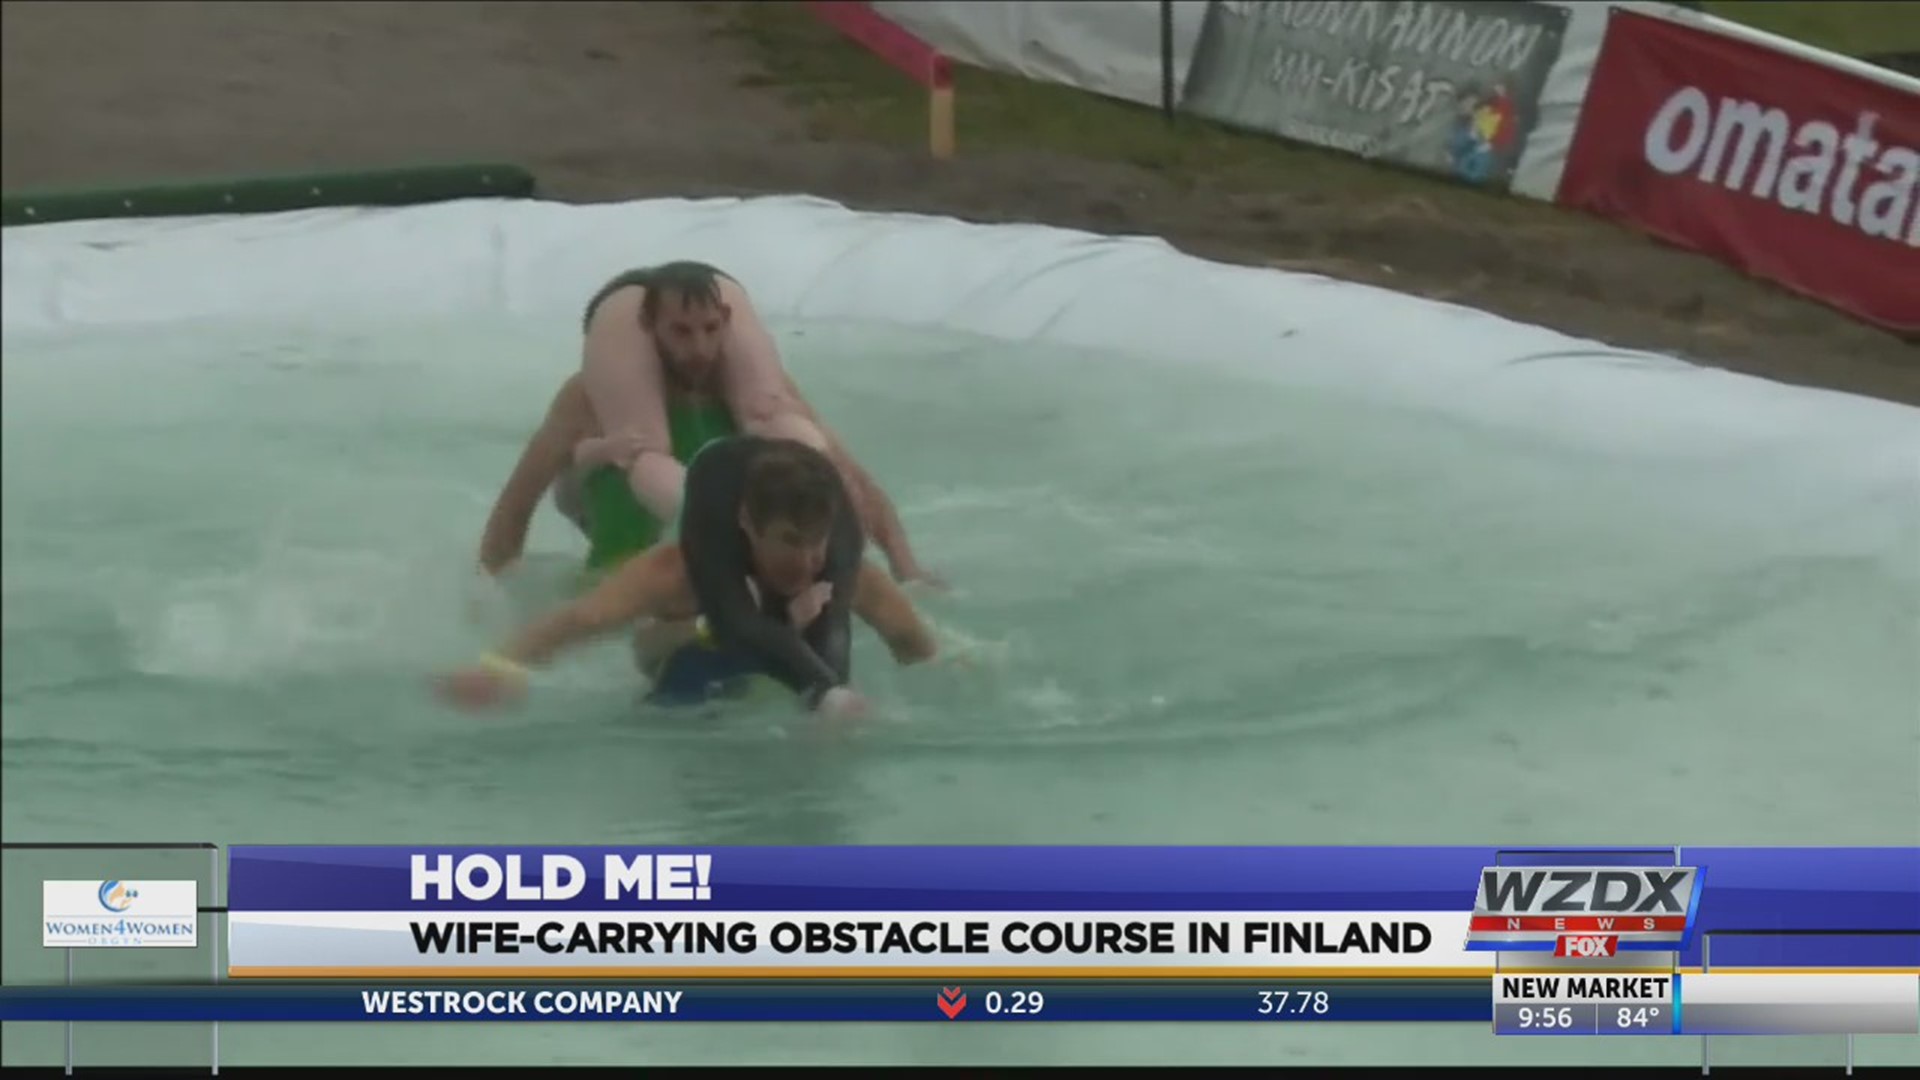 A wife carrying competition in Finland this past weekend was part fun, but also requires some serious athletic ability.